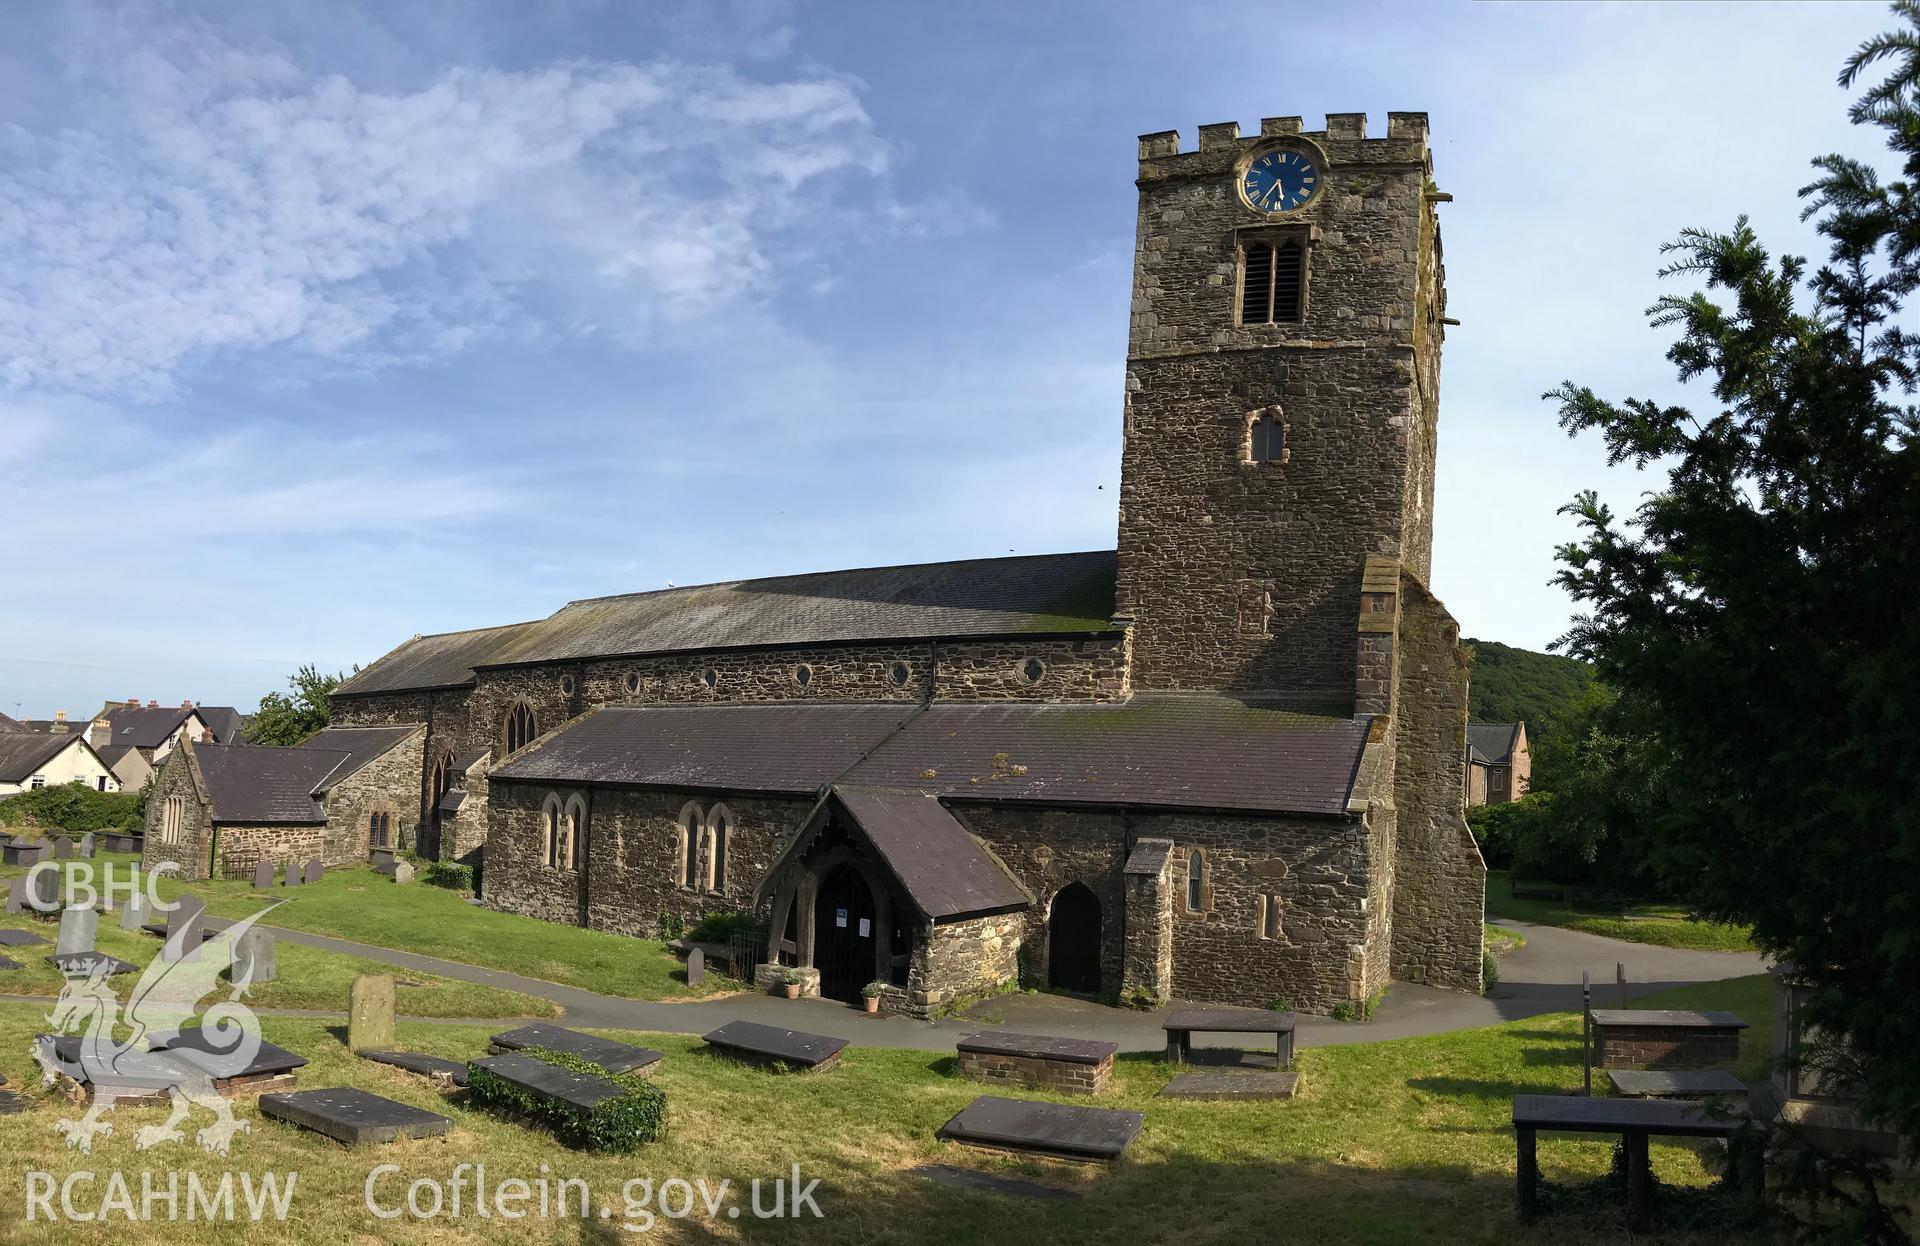 Colour photo showing exterior view of St. Mary and All Saints Church, Conwy, formerly Aberconwy Abbey, taken by Paul R. Davis, 23rd June 2018.